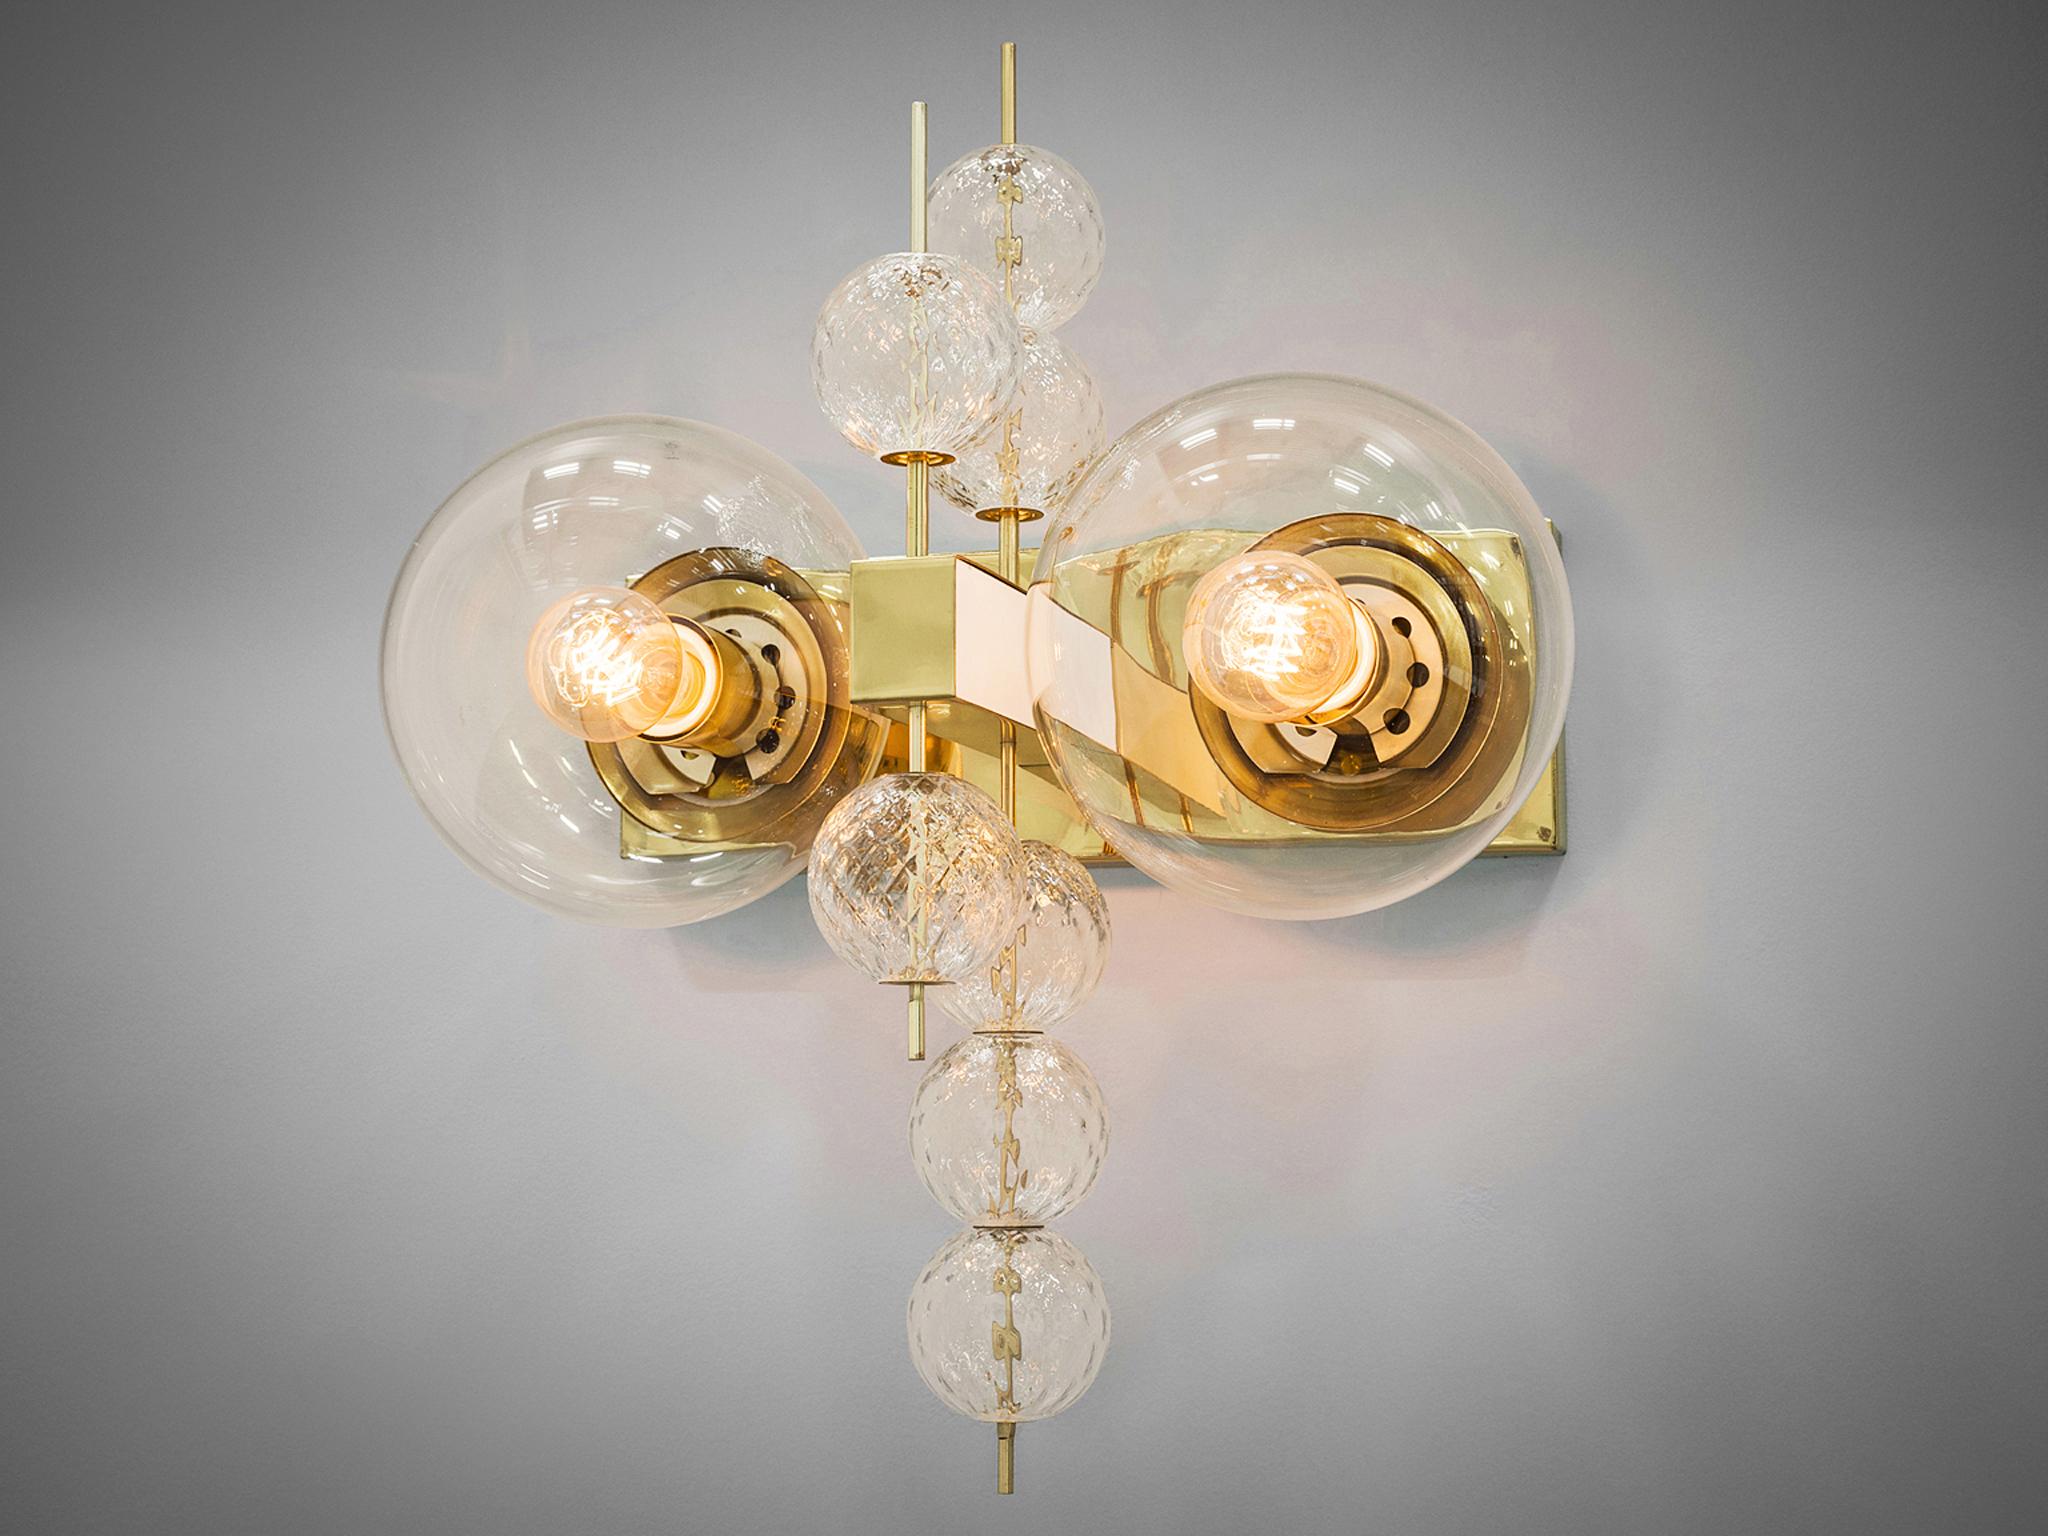 Wall light, glass and brass, Europe, 1970s.

Ornate brass and glass wall light with two-light points and small decorative structured glass globes. The chandelier is beautifully decorated thanks to the structured glass. The clear glass shades bring a